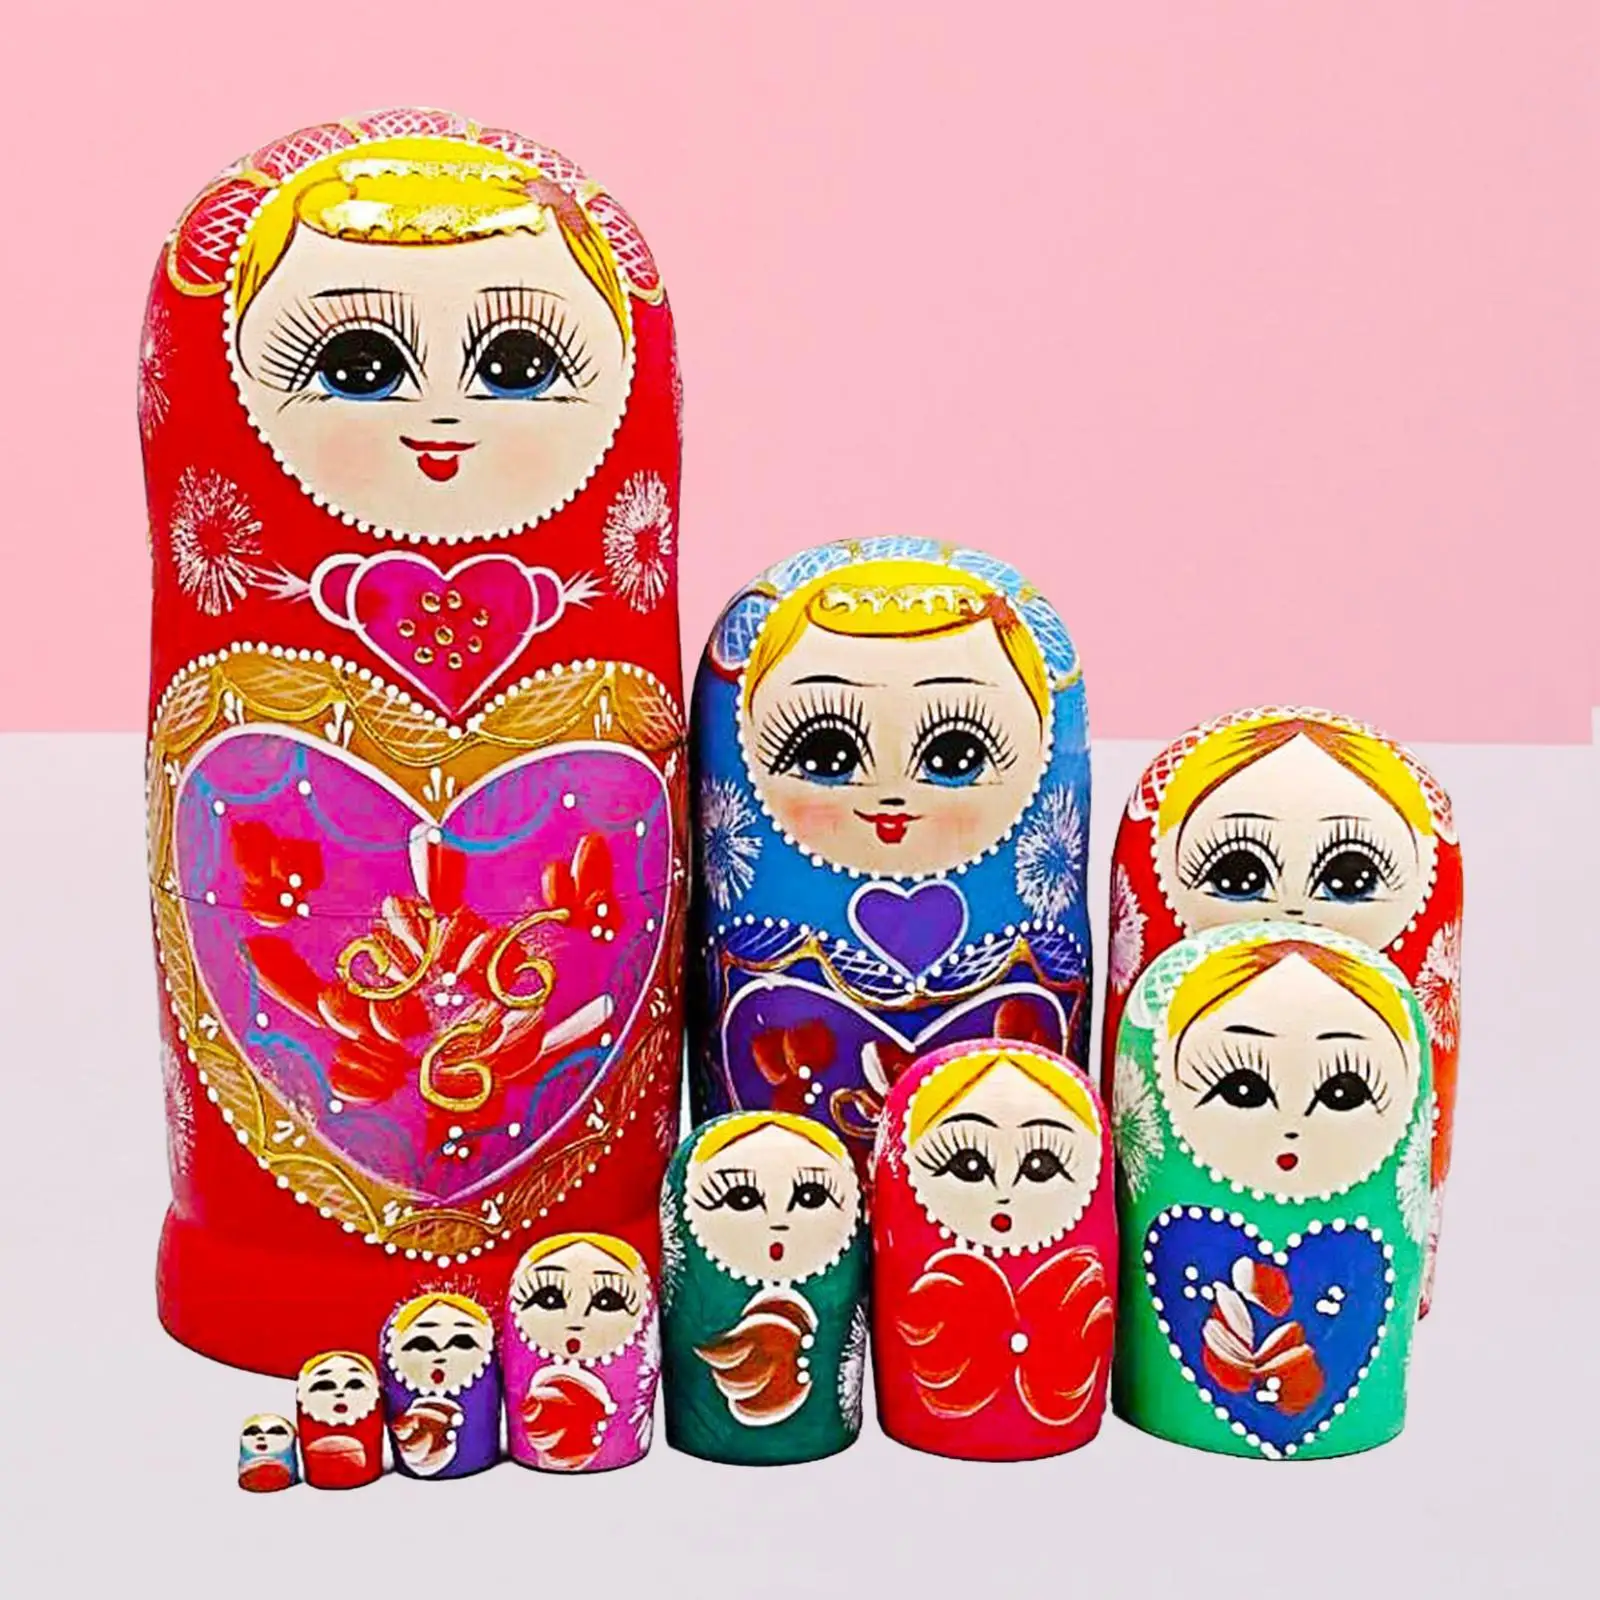 10x Stacking Doll Set Cute Birthday Gifts Russian Nesting Dolls Ornaments